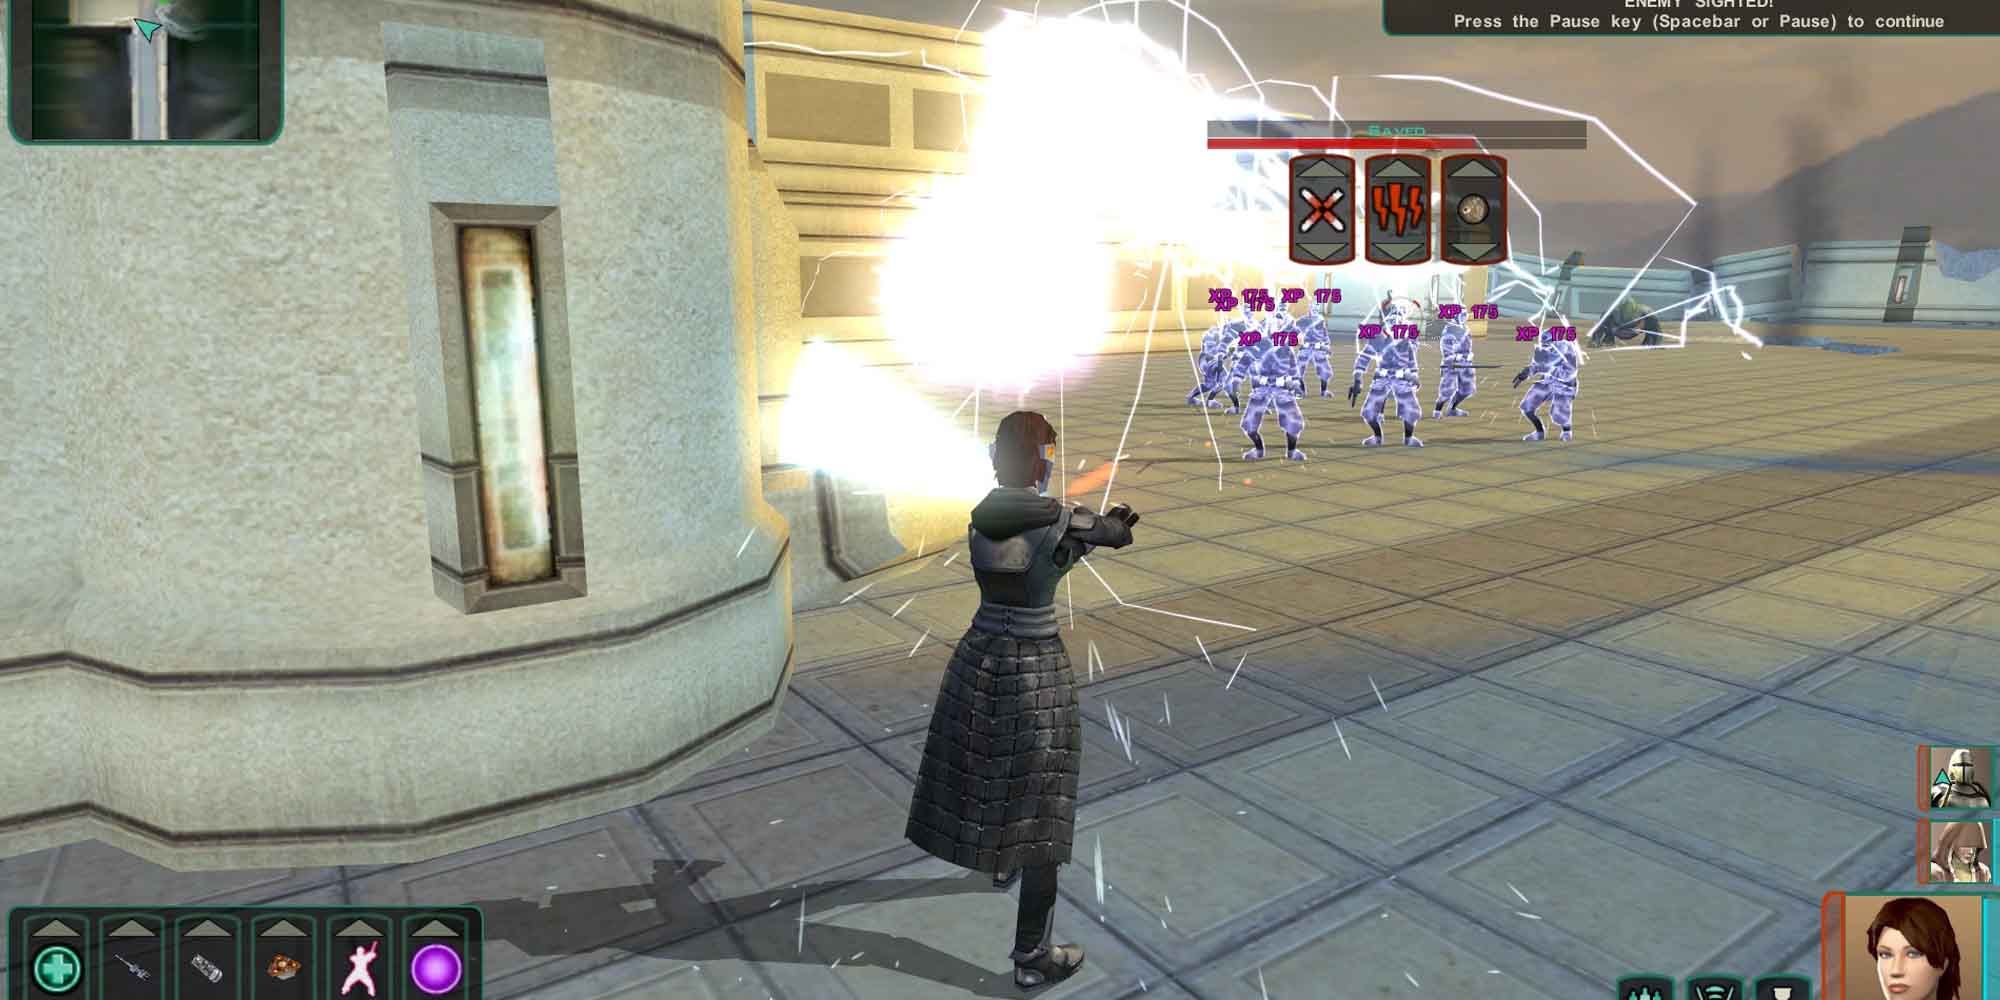 Using Force Lightning on a group of enemies in Star Wars: Knights of the Old Republic